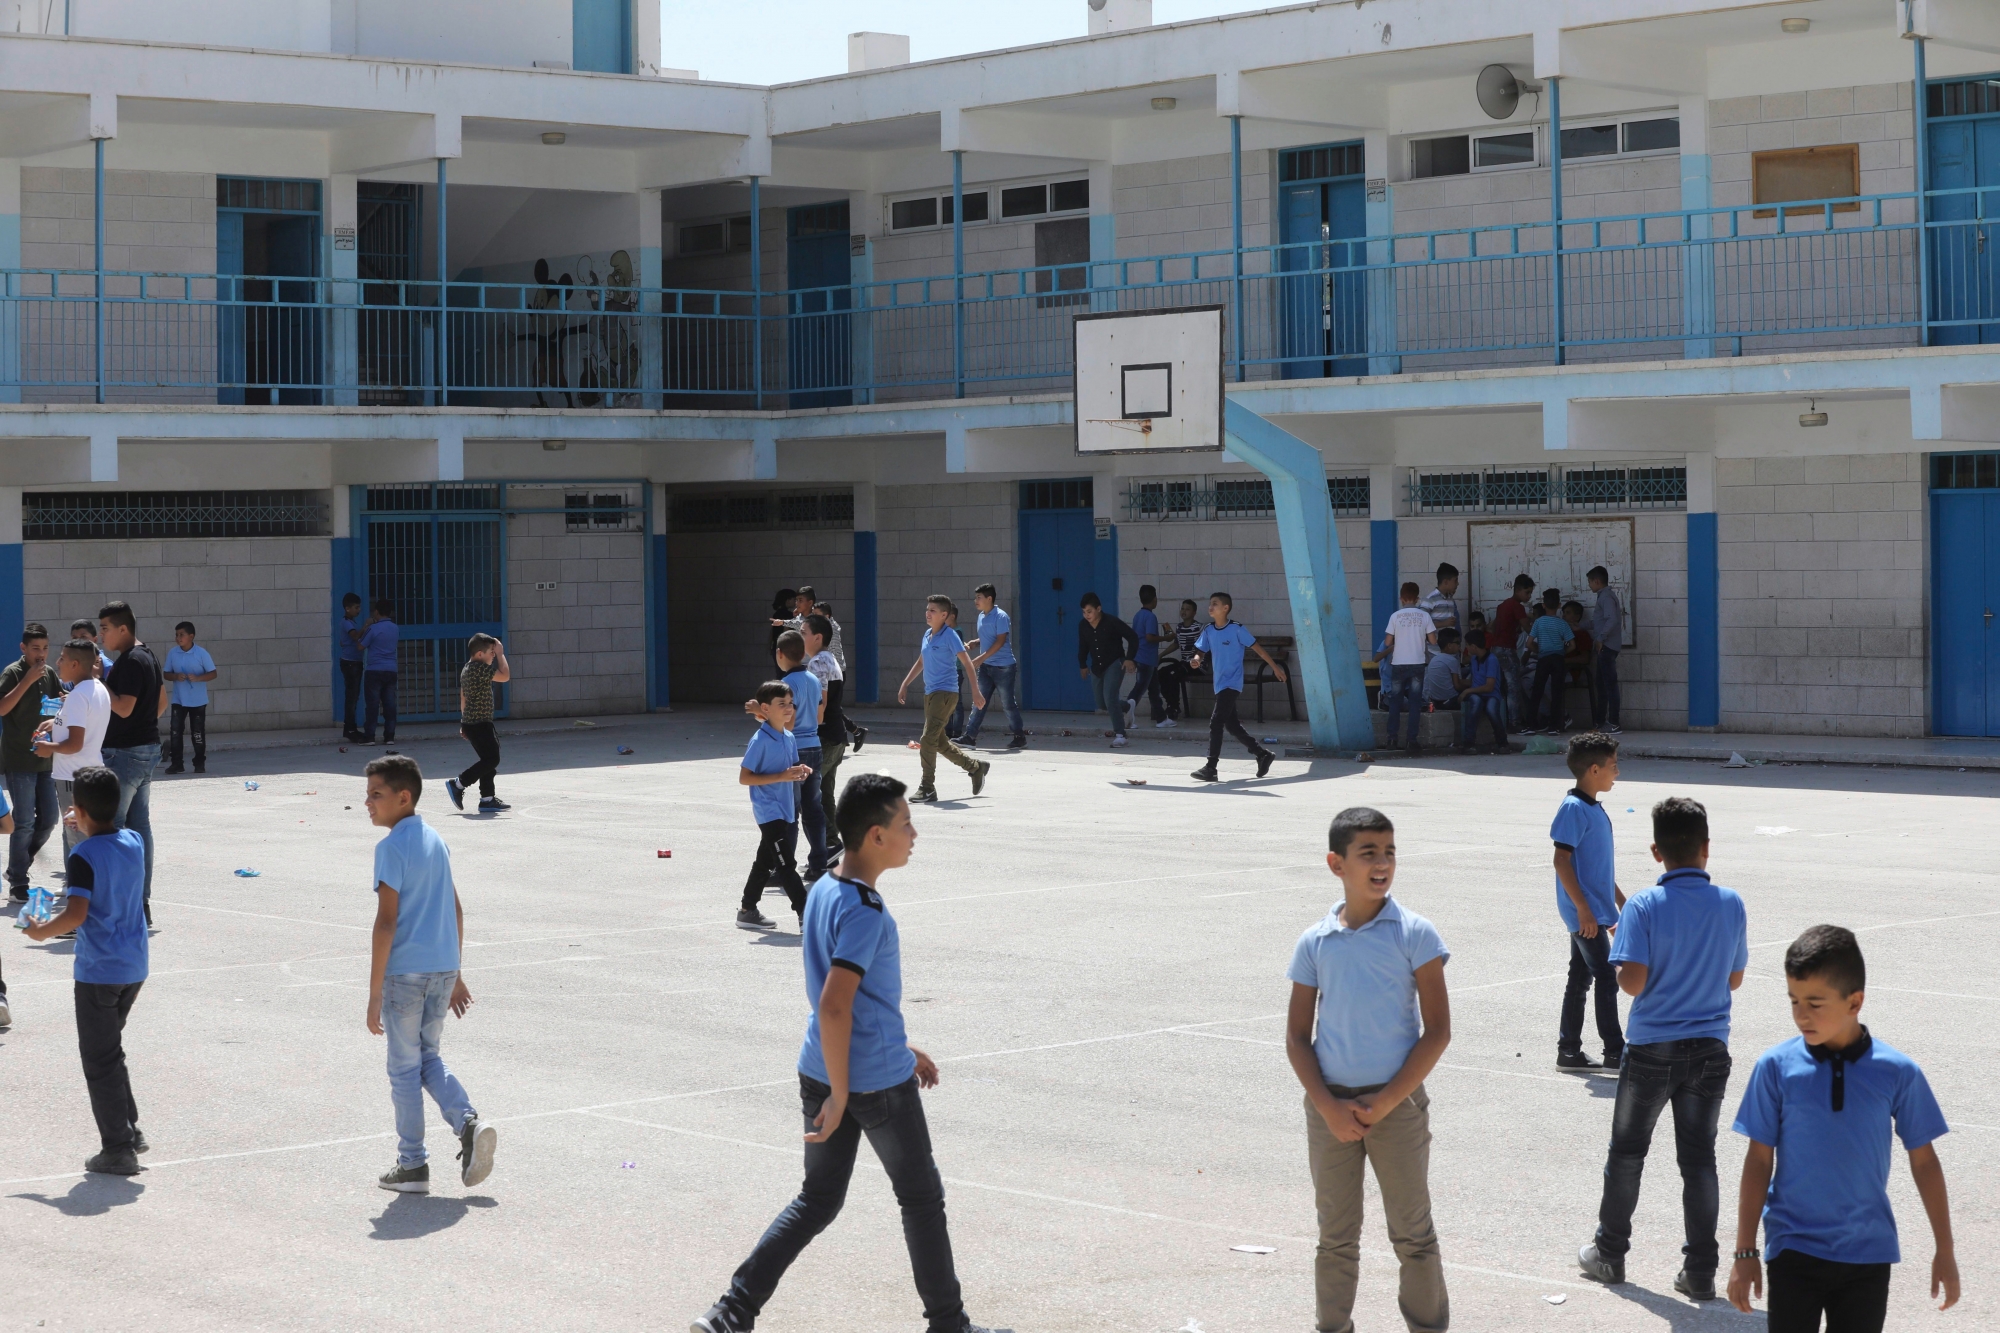 epa06980442 Palestinian children arrive to their UNRWA school during the first school day at al-Jalazoun refugee camp near the west bank city of Ramallah, 29 August 2018. According to media reports on 25 August 2018, the United States cut over 200 million US dollar in aid to Palestinians in the West Bank and Gaza Strip. US President Donald Trump reportedly ordered the State Department to direct the funds to 'high priority projects elsewhere'. The move comes after the US State Department suspended 65 million US dollar in aid to the United Nations Relief and Works Agency for Palestine Refugees in the Near East (UNRWA).  EPA/ALAA BADARNEH MIDEAST ISRAEL PALESTINIANS REFUGEES USA AID CUTS